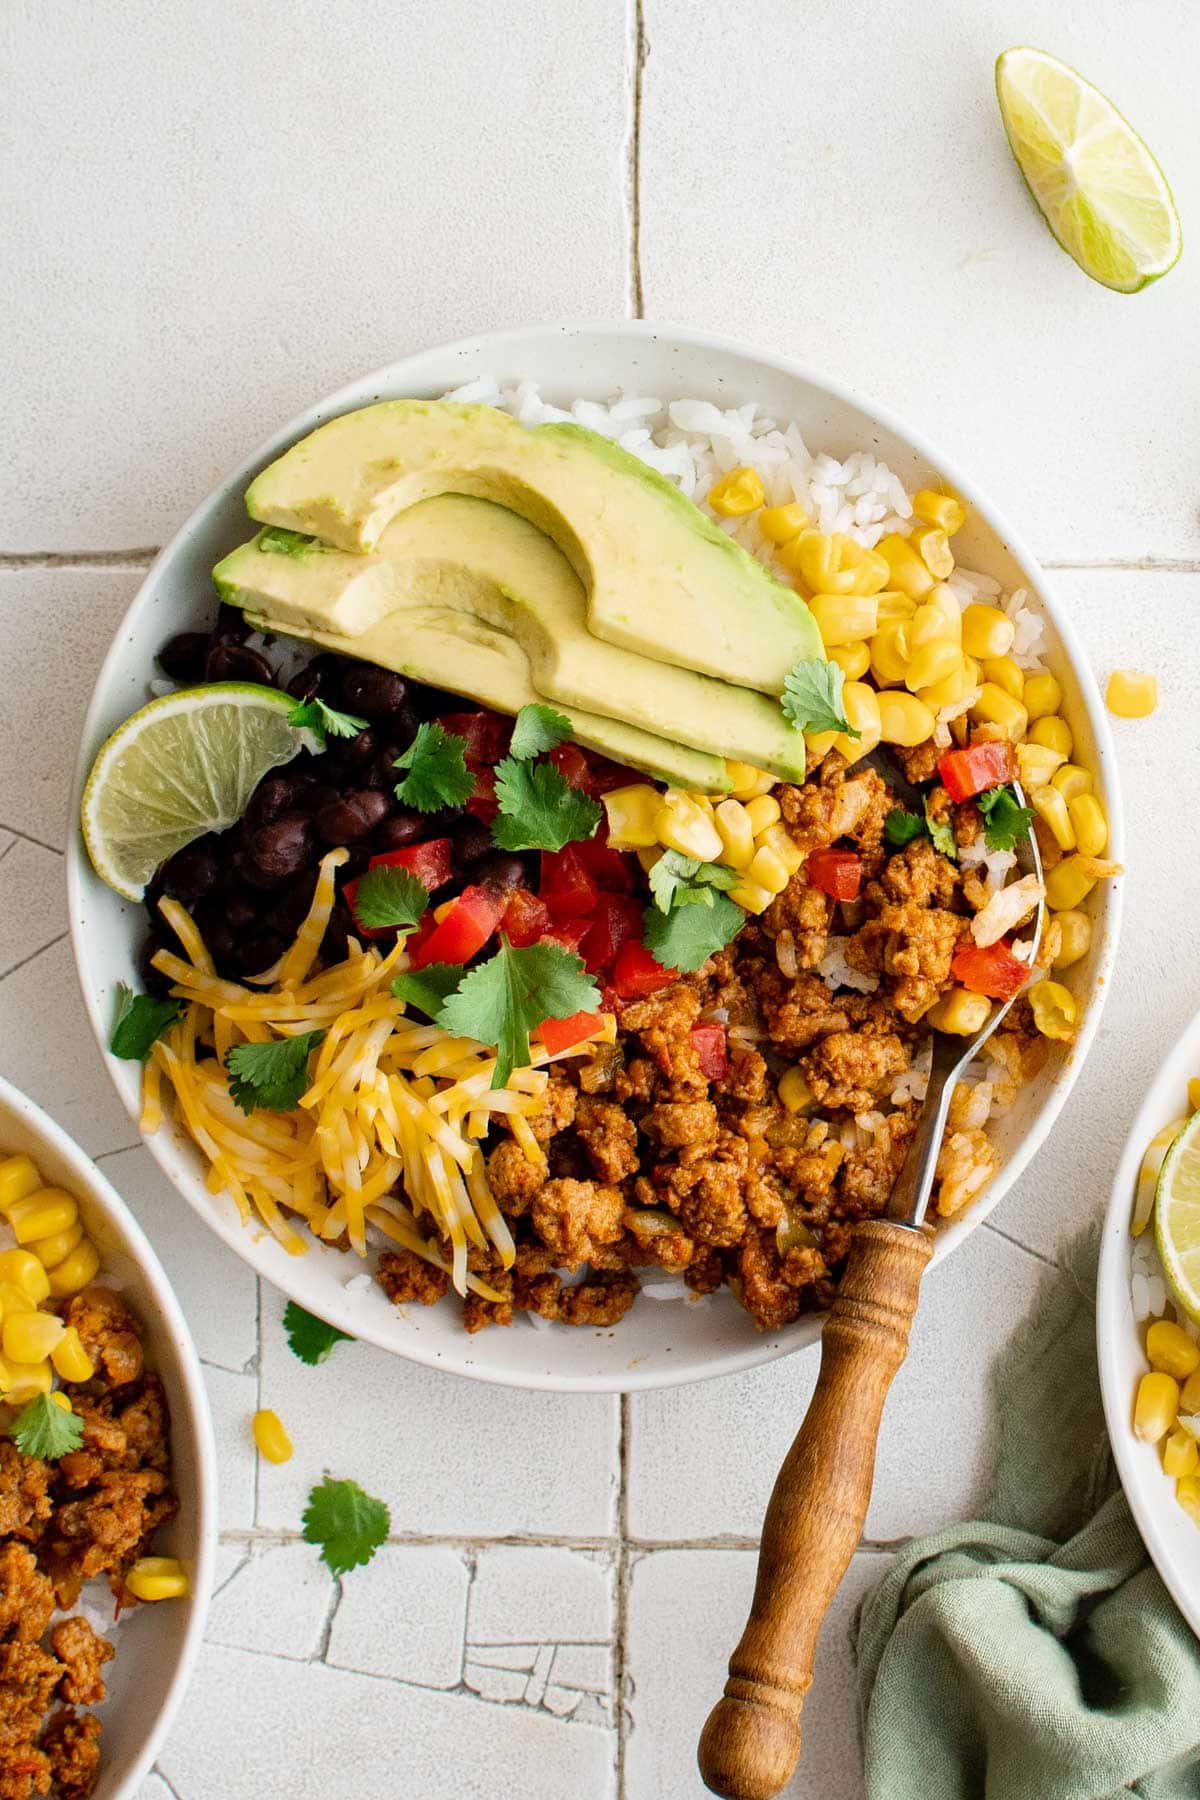 Taco Bowl with rice, beans, meat, lettuce, avocado and cheese.